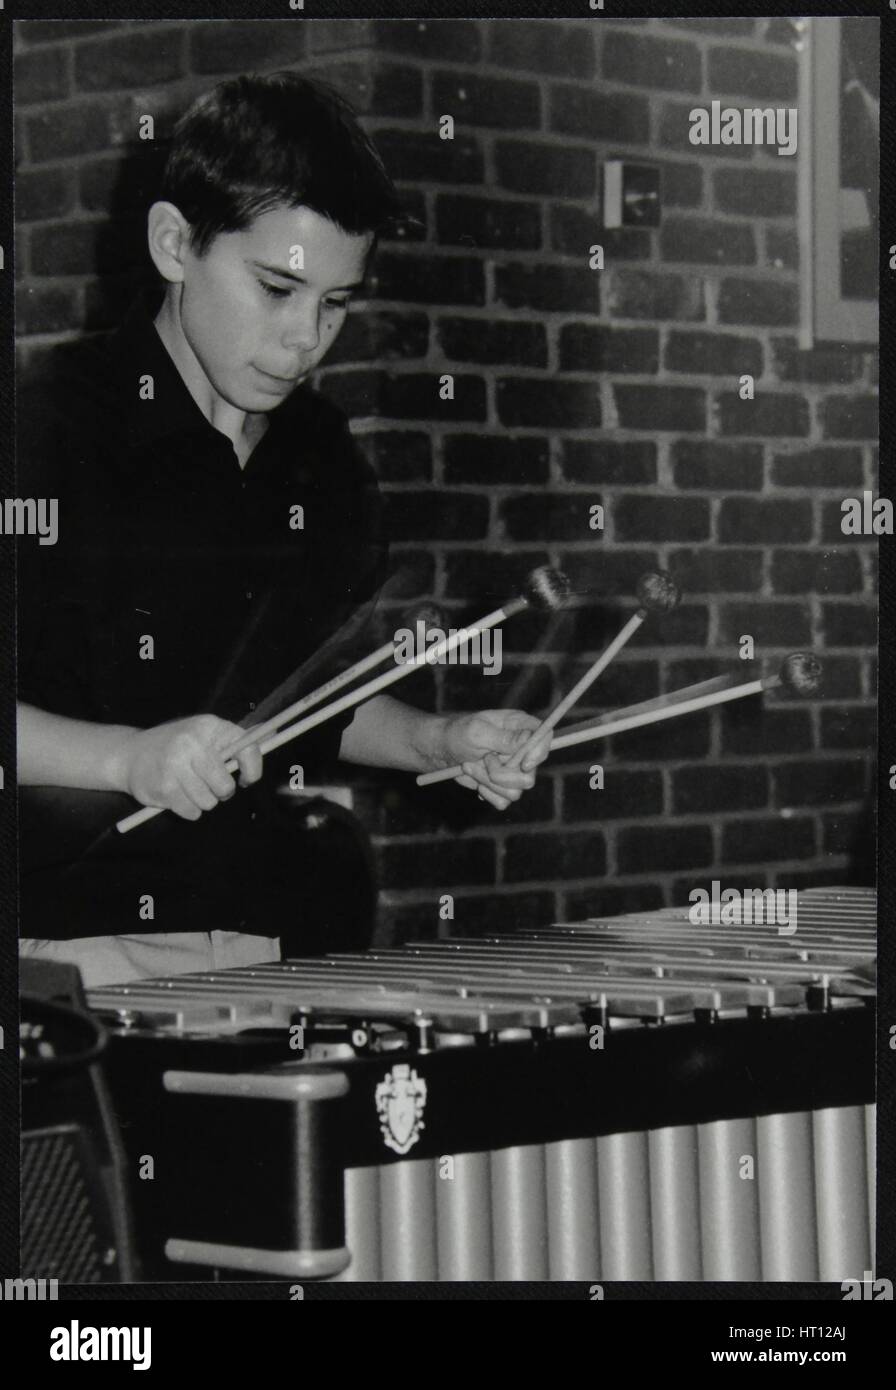 Lewis Wright playing the vibraphone at The Fairway, Welwyn Garden City, Hertfordshire, 2003. Artist: Denis Williams Stock Photo